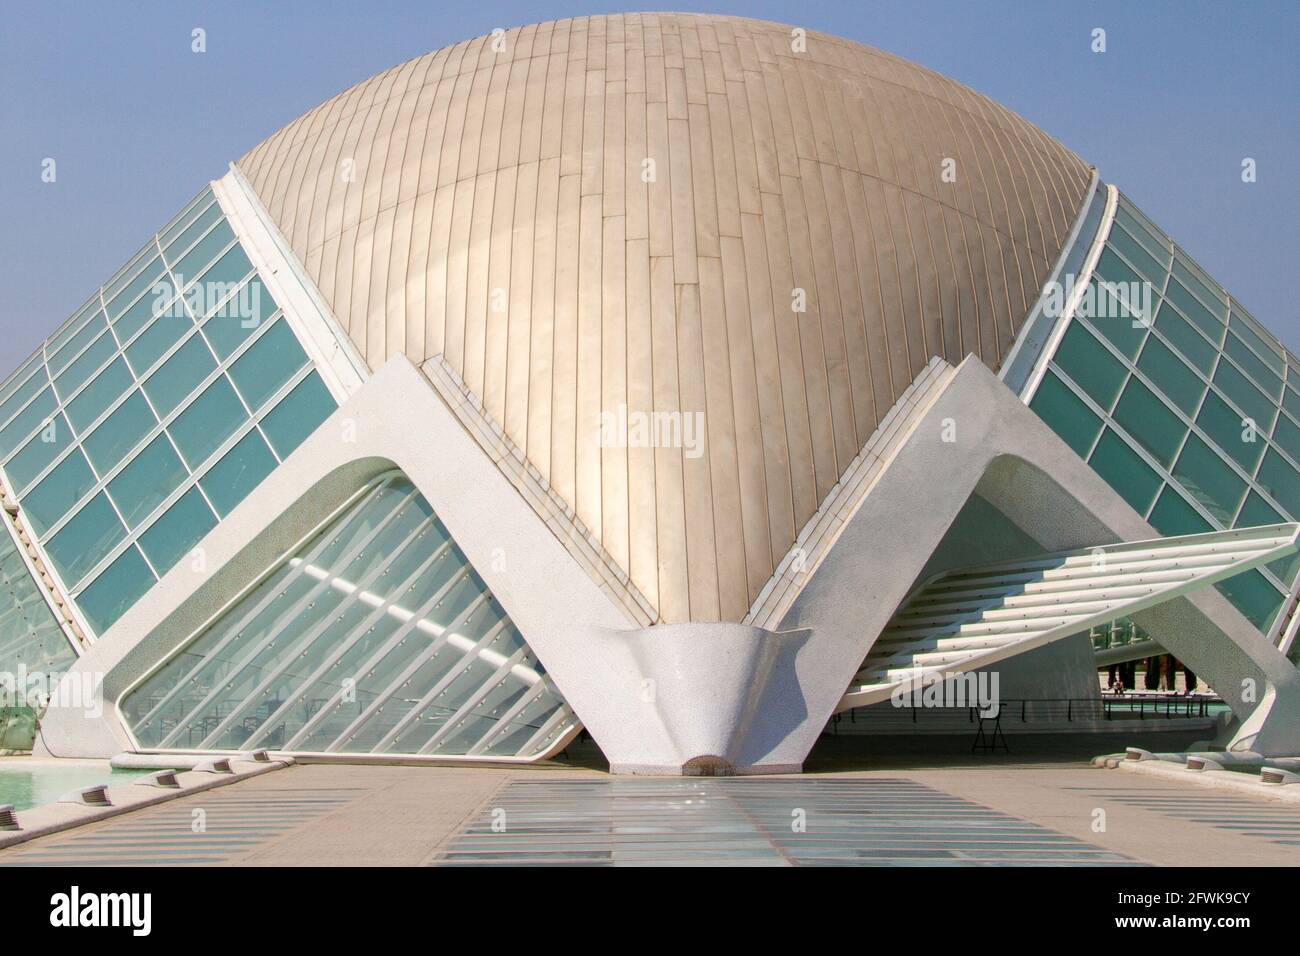 Valencia, Spain, July 26, 2016. The Hemisferic is one of the buildings in the Spanish architectural ensemble of the City of Arts and Sciences in Valen Stock Photo